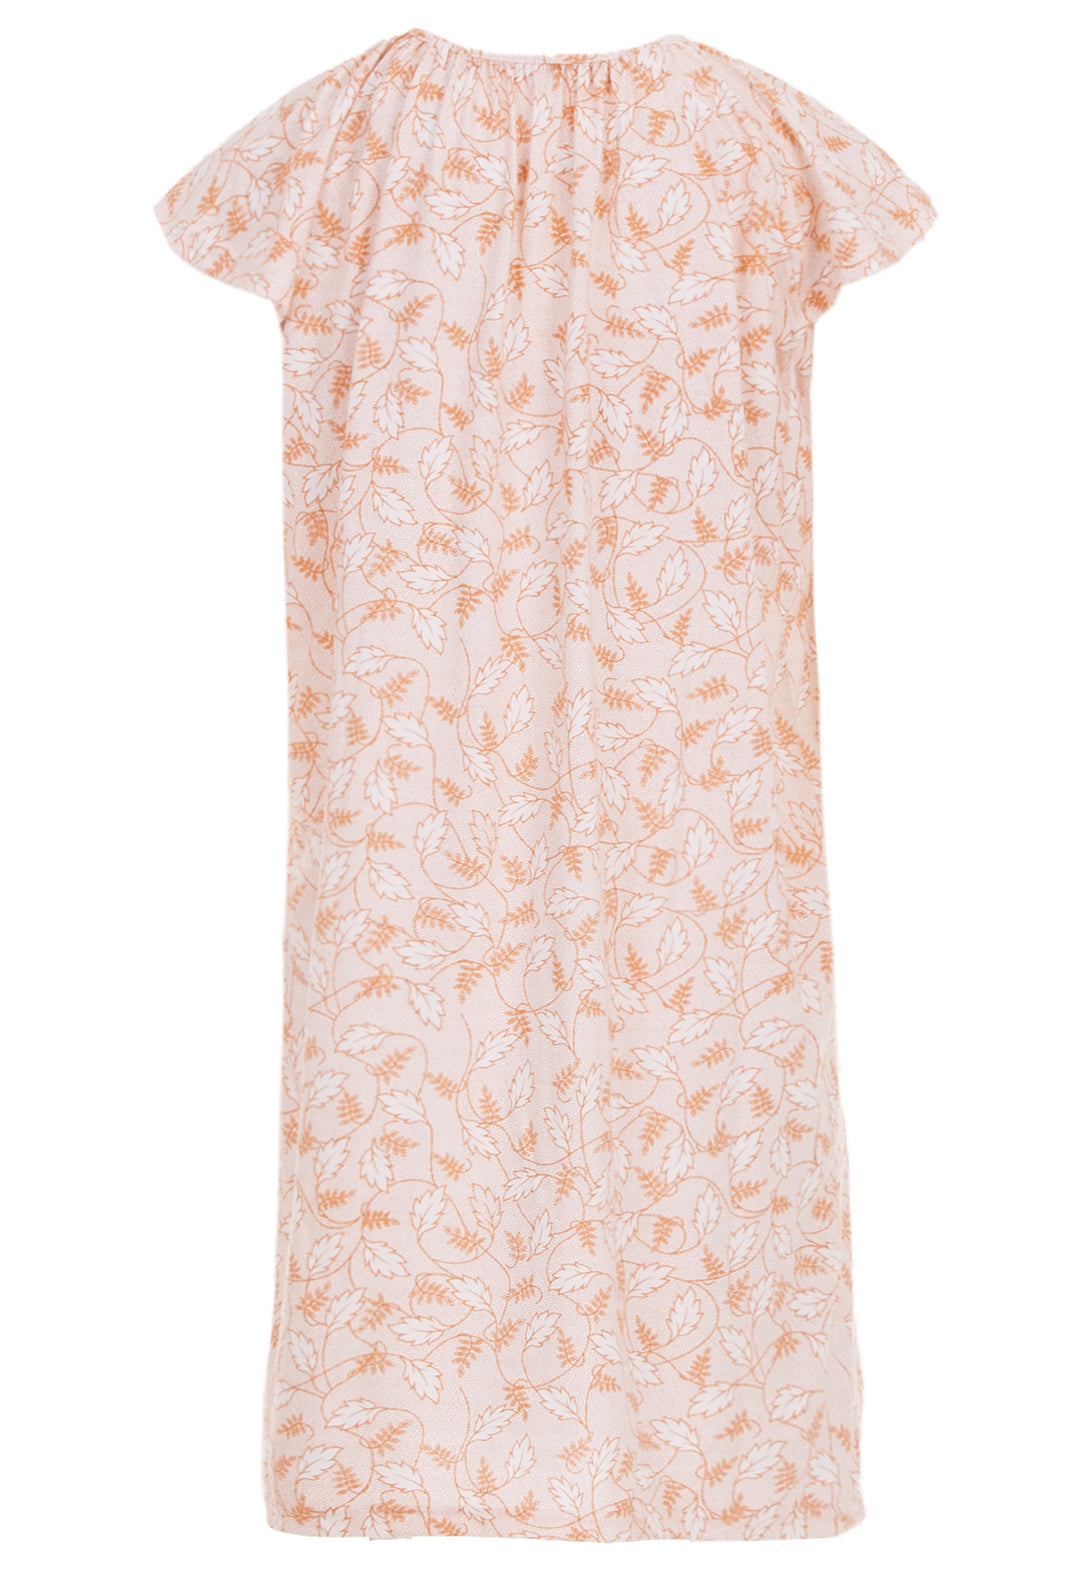 Nightgown short-sleeved - tendrils of leaves